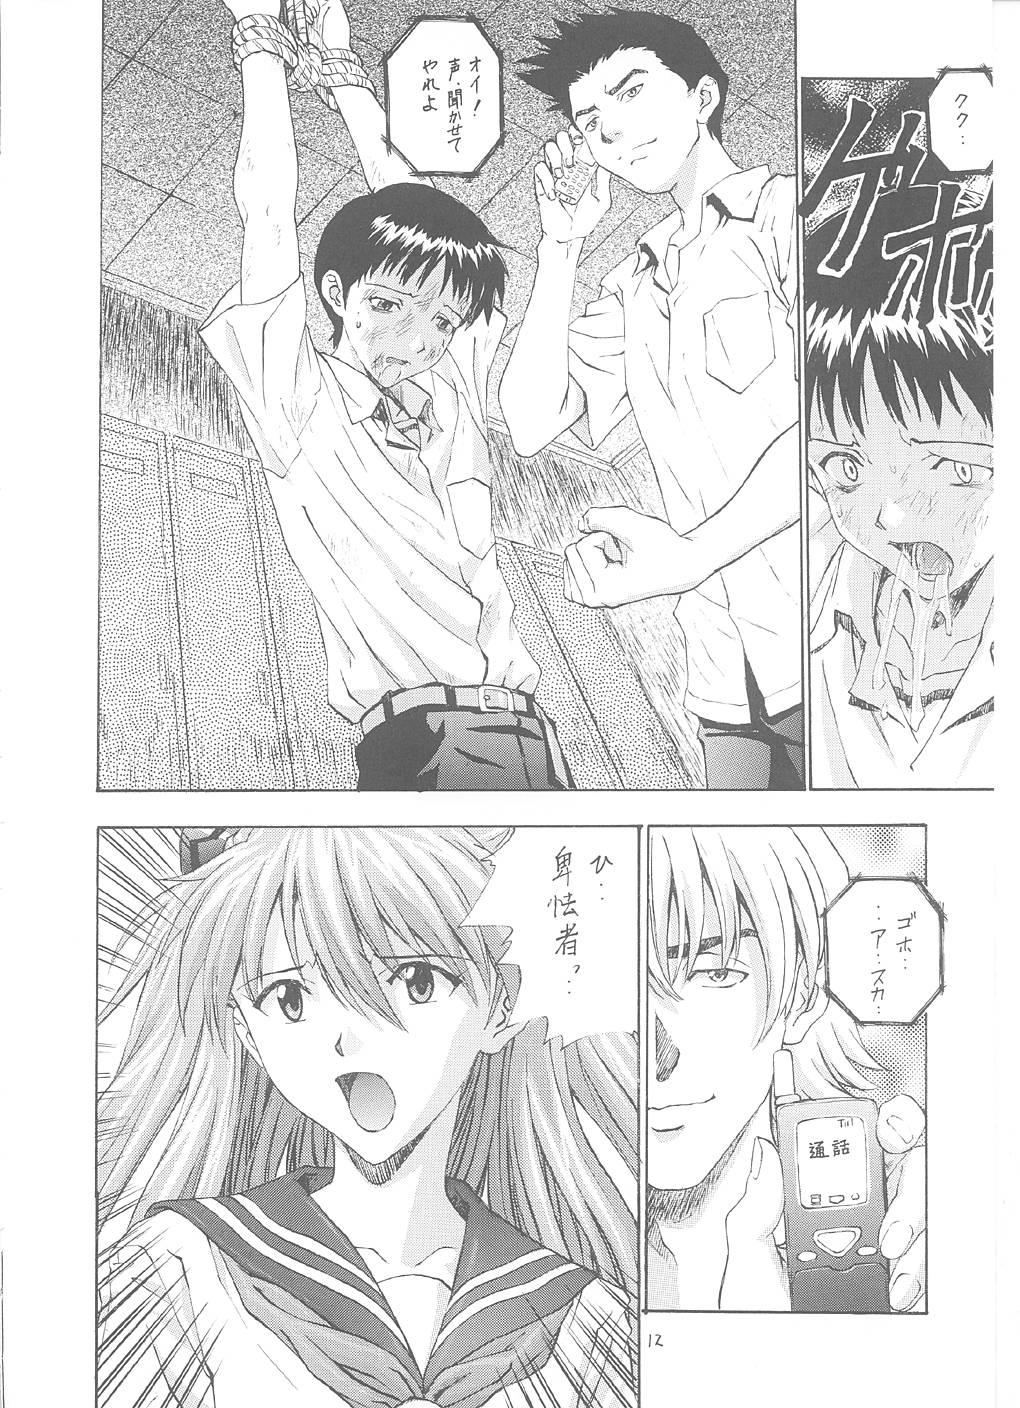 Colombia A-one - Neon genesis evangelion Softcore - Page 11